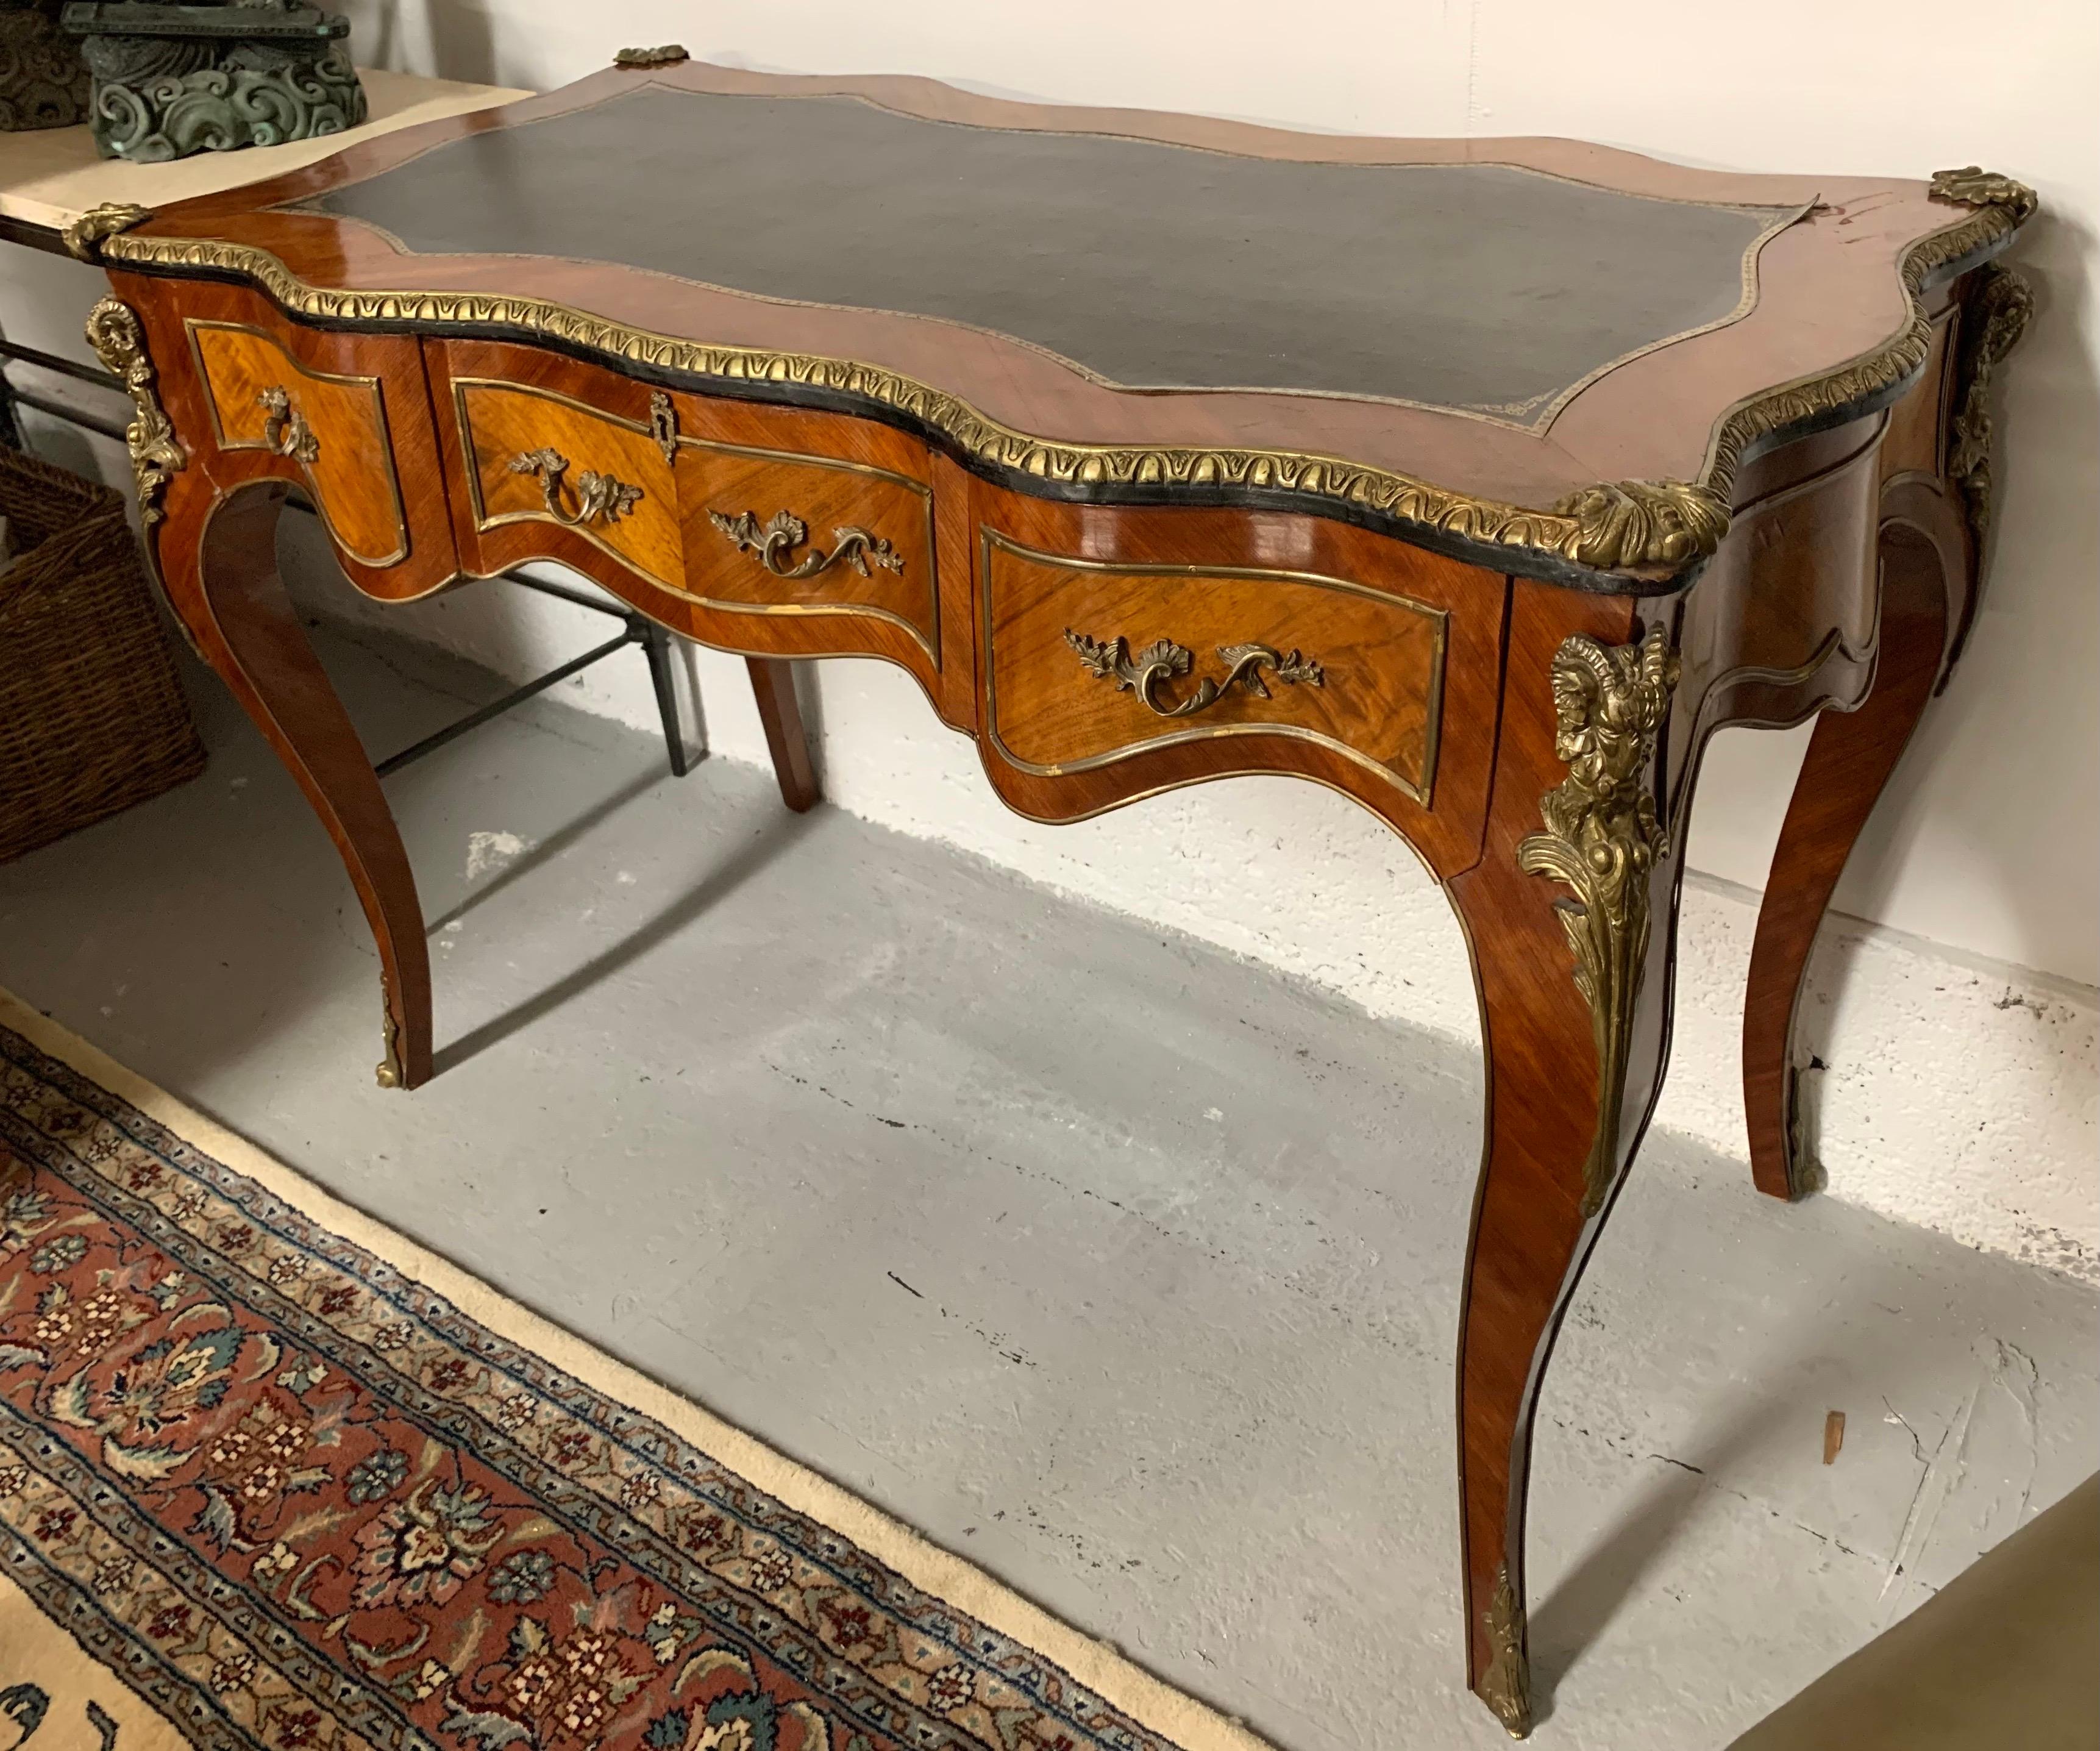 Stunning French Louis XV style three drawer desk/bureau plat with dore bronze mounts and leather writing surface. Looks great on all sides.